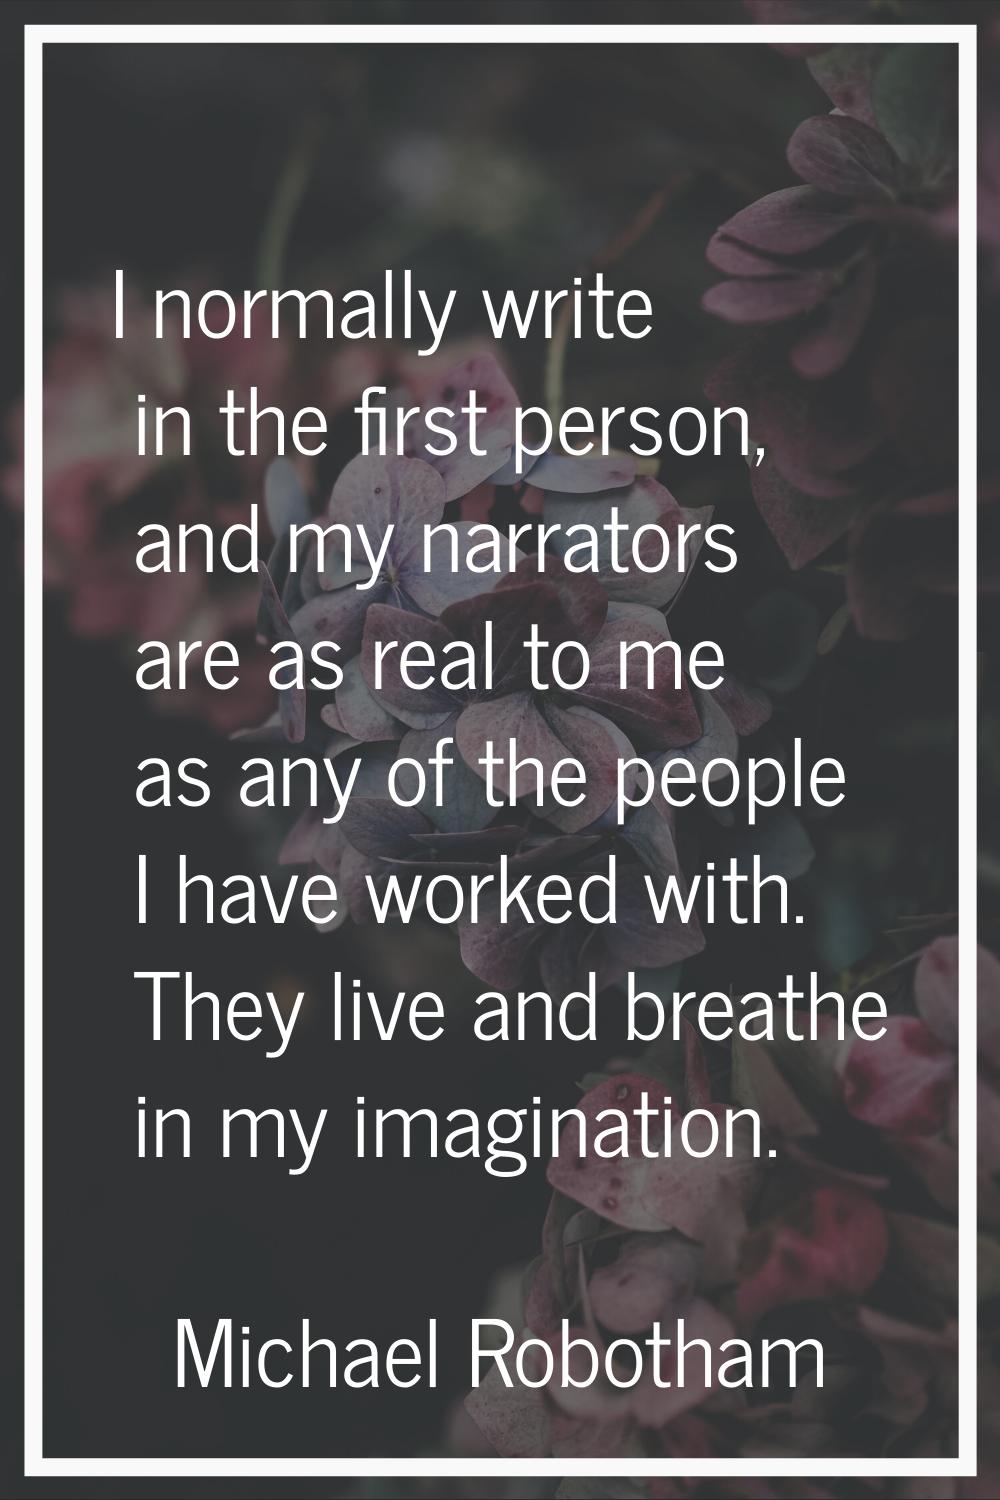 I normally write in the first person, and my narrators are as real to me as any of the people I hav